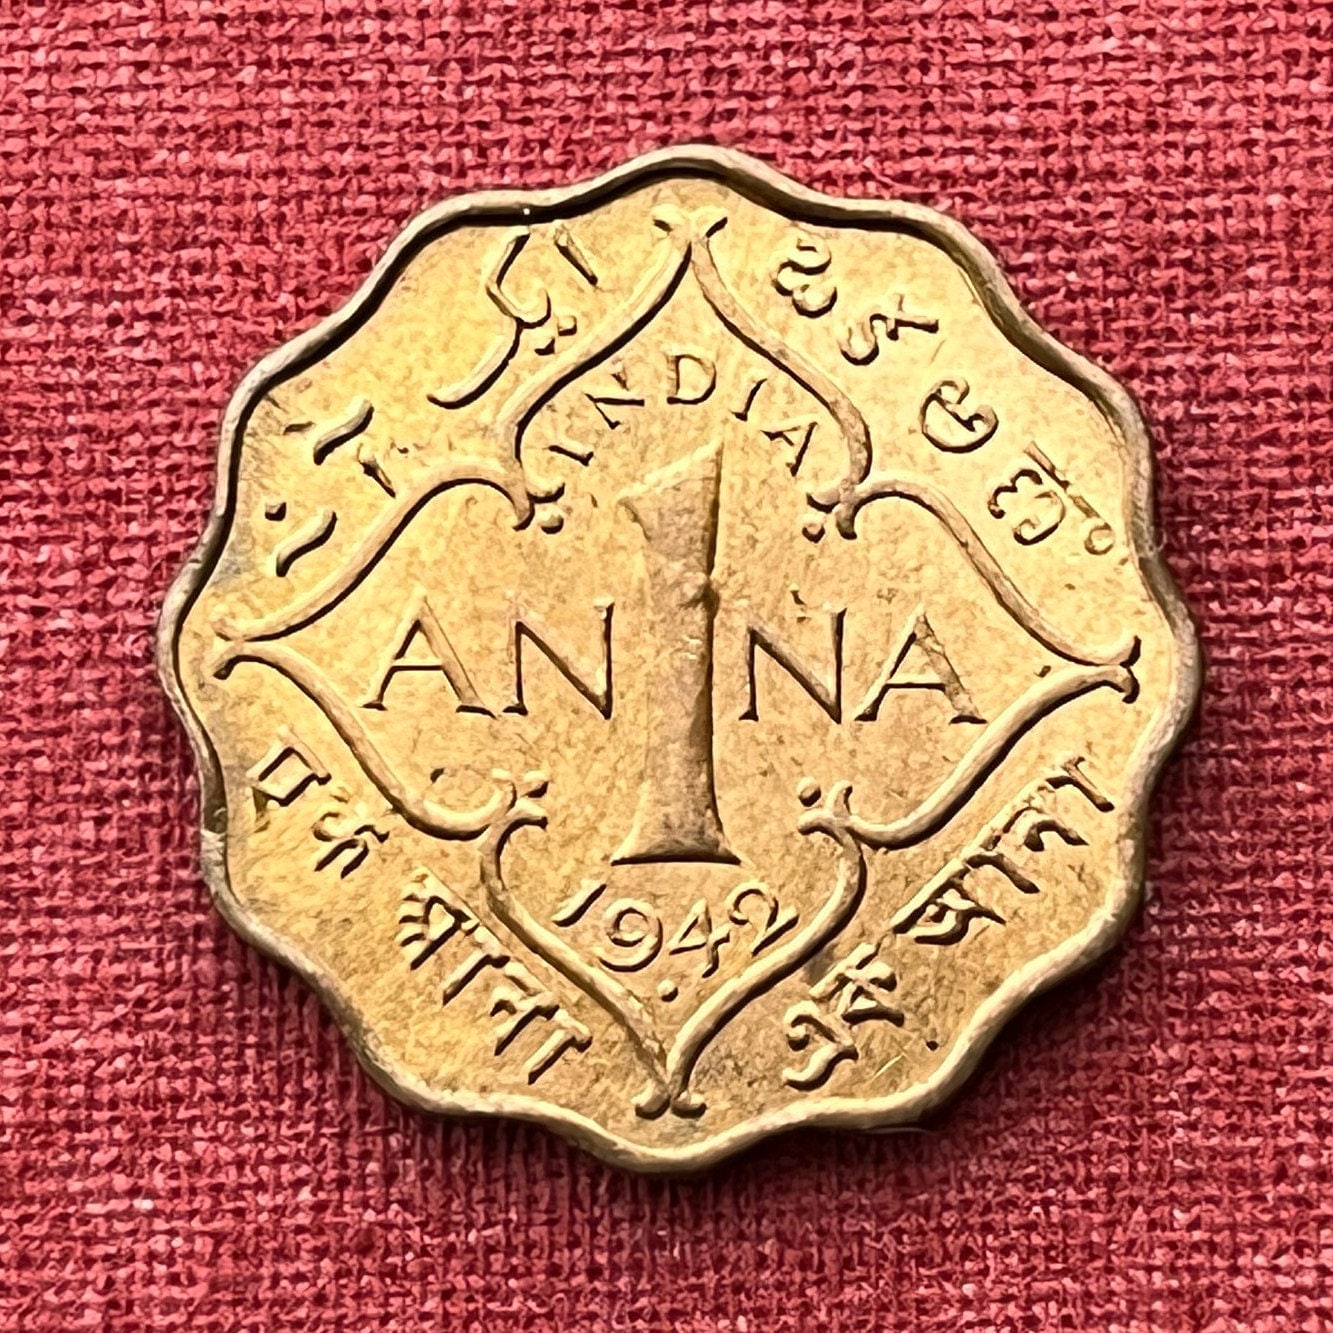 Zewelery India King George 1 Quarter Anna 1956 coin Year might